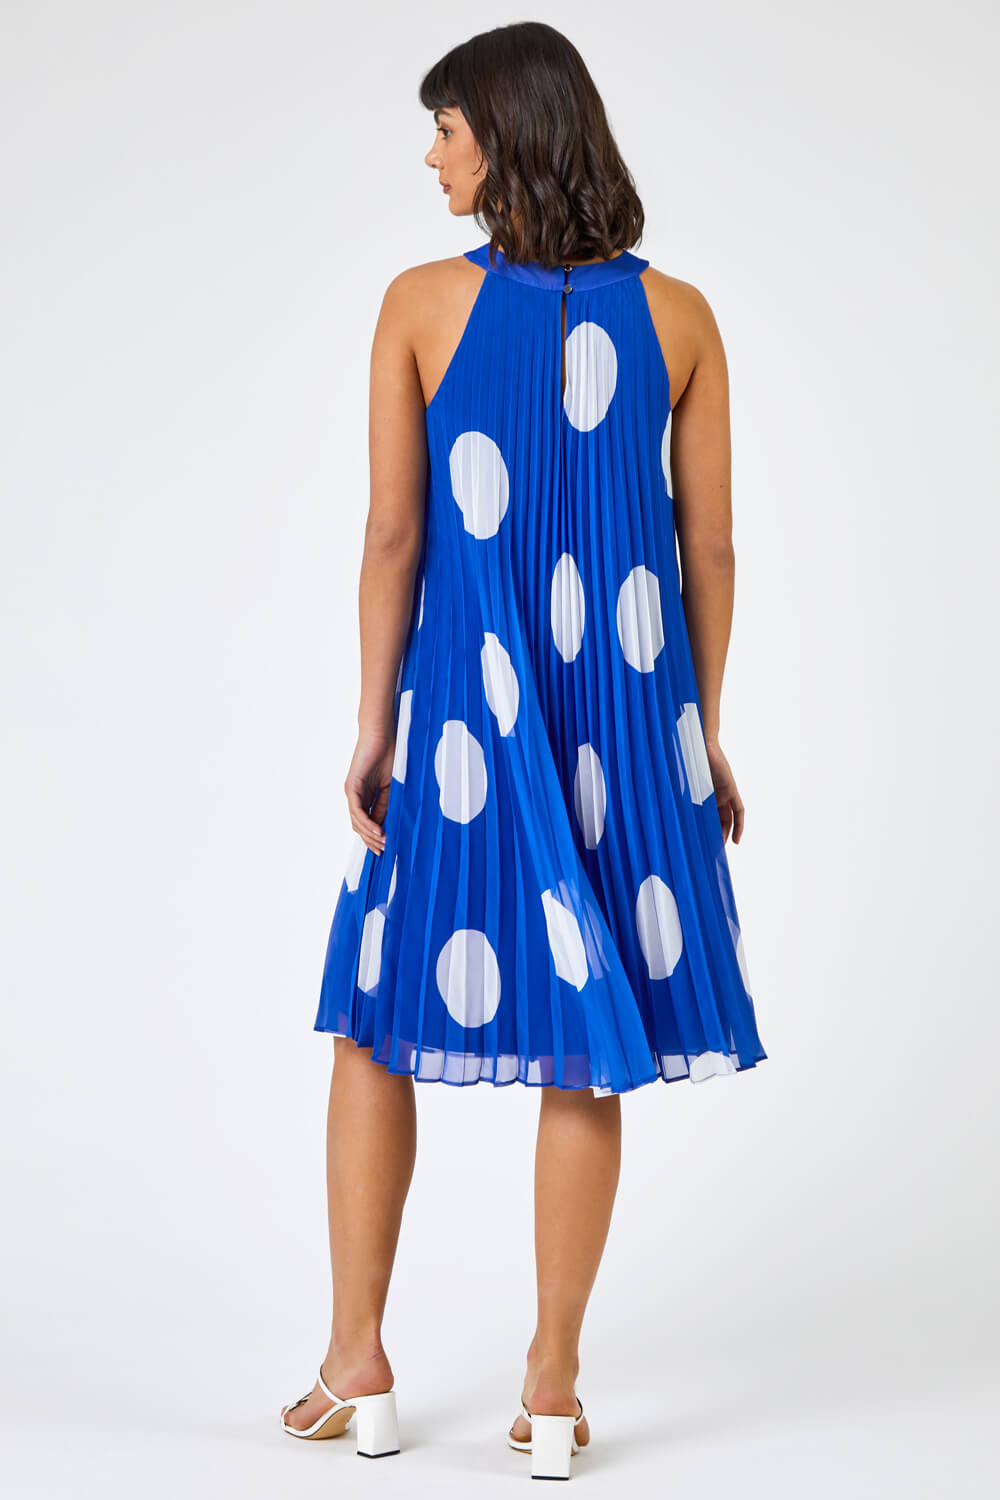 Royal Blue High Neck Spot Pleated Swing Dress, Image 2 of 5